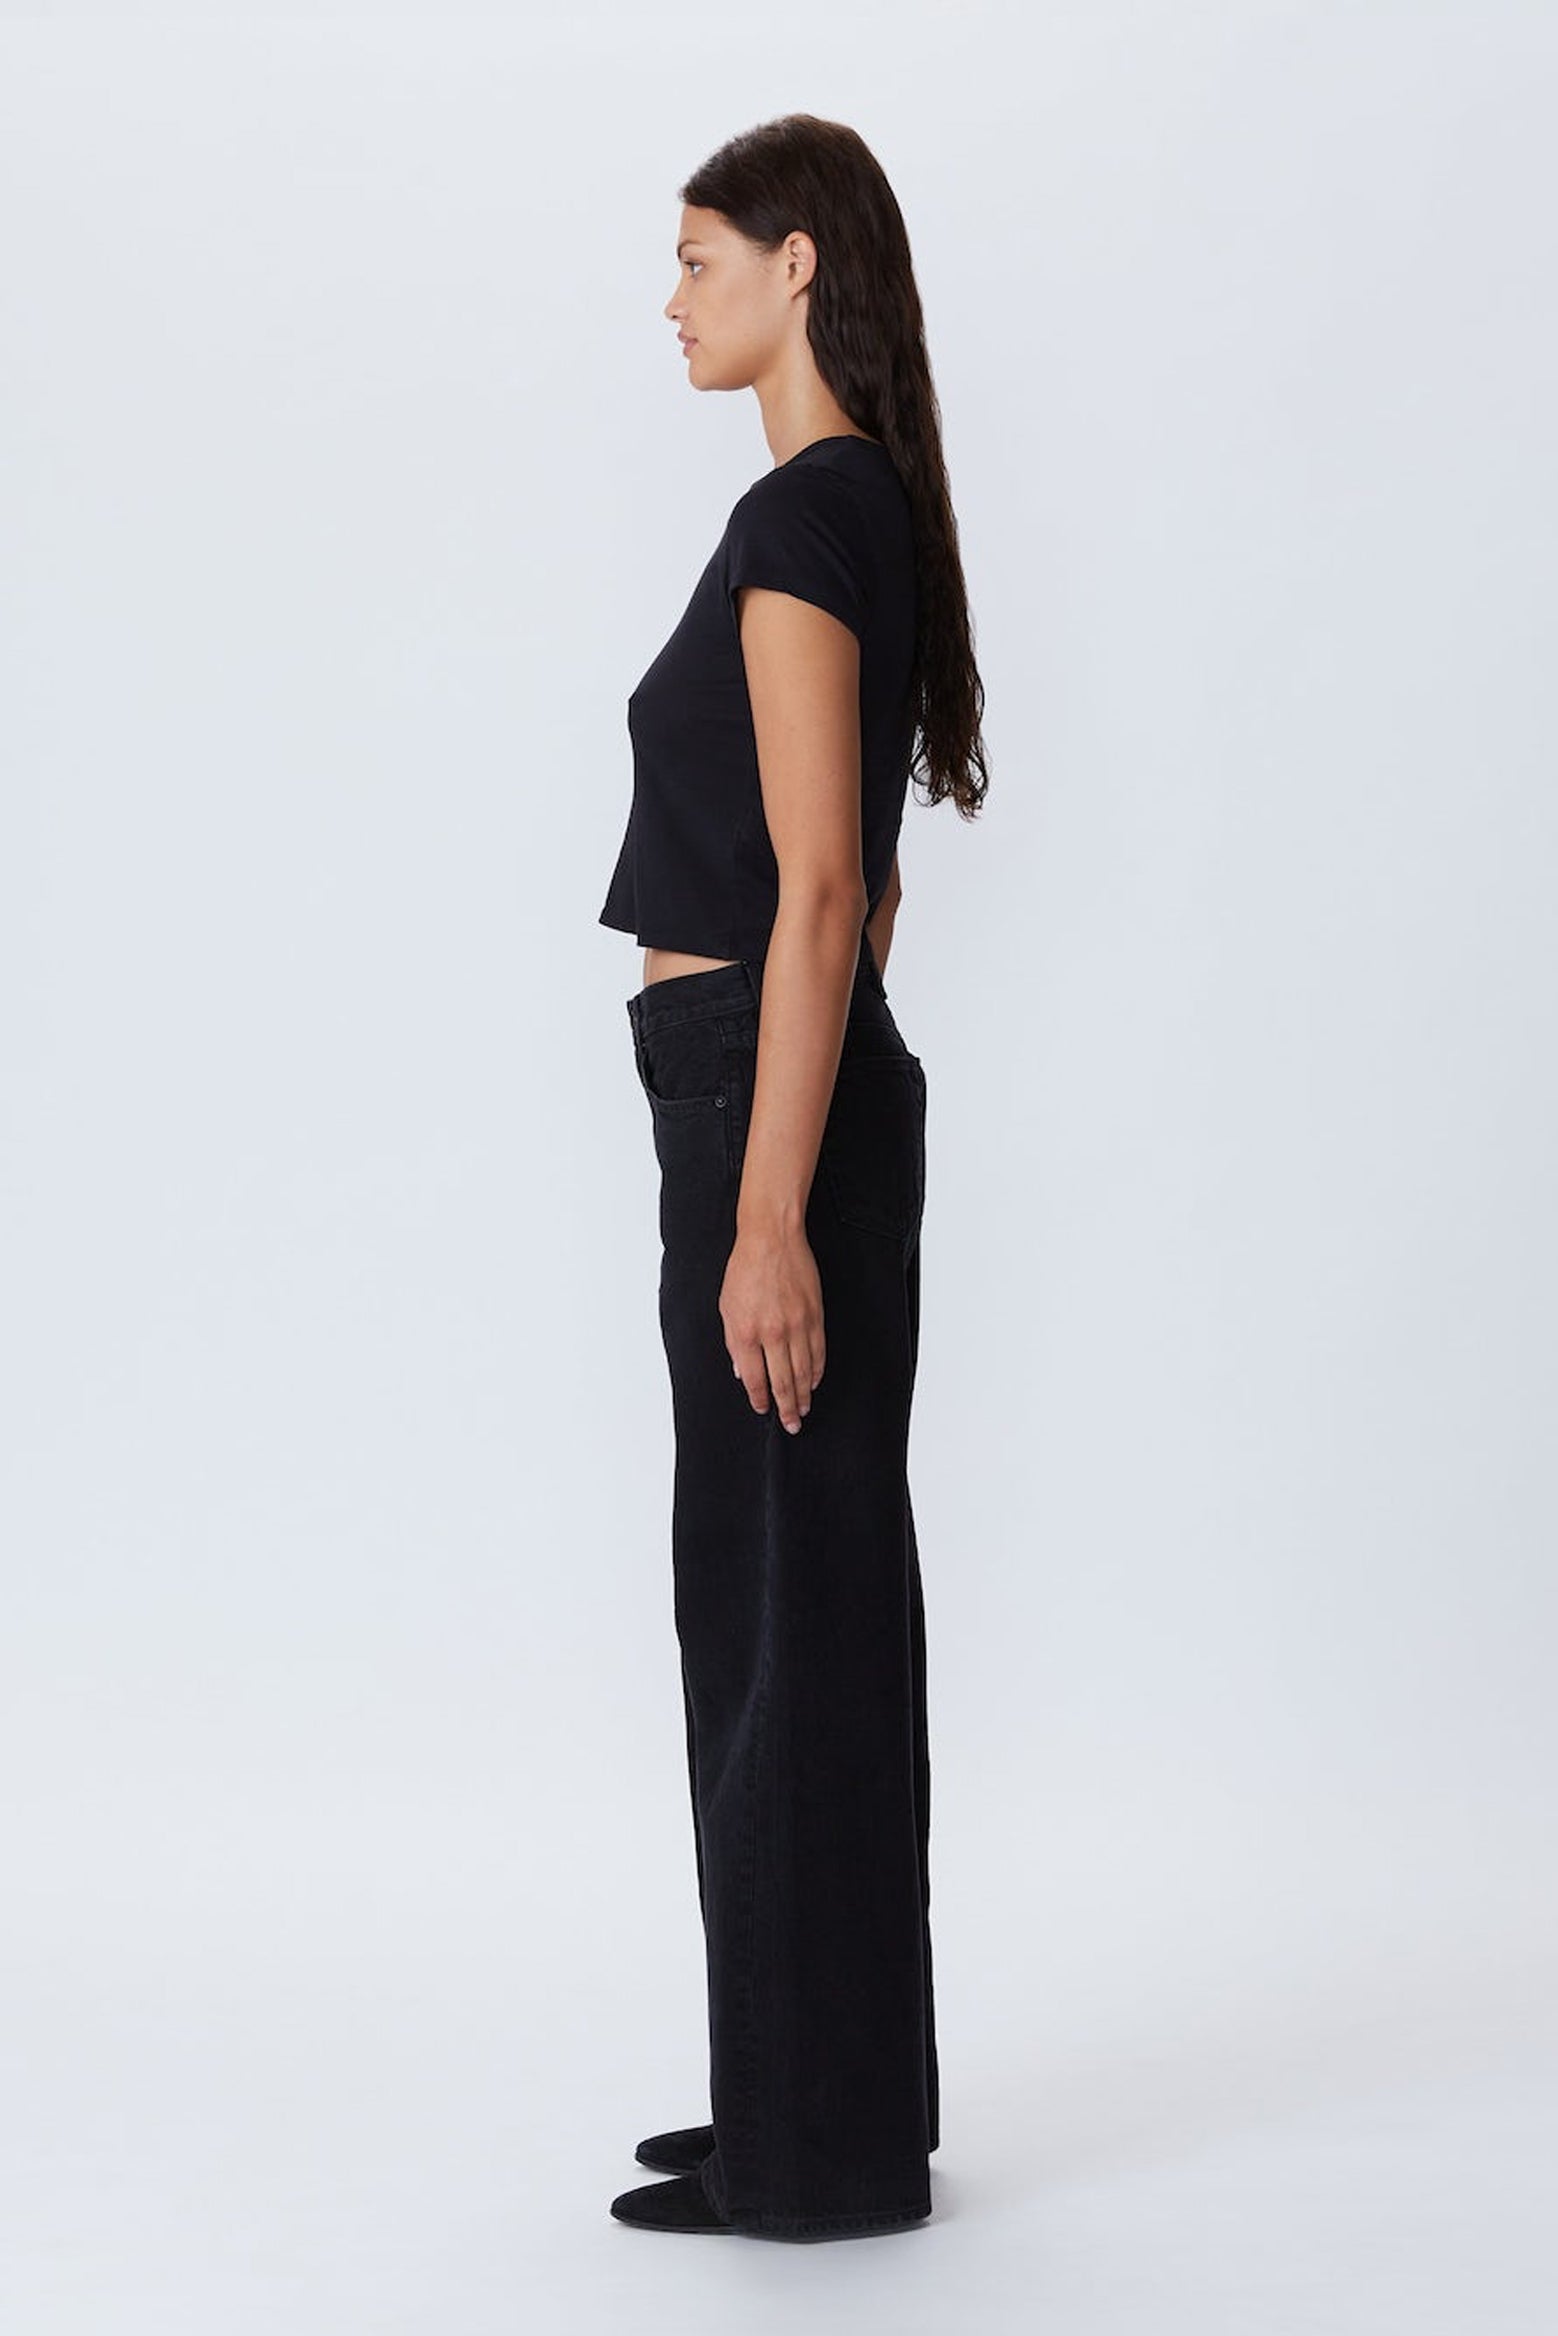 The SLVRLake Mica Low Rise Wide Leg Jean in Shadow Ridge available at The New Trend Australia